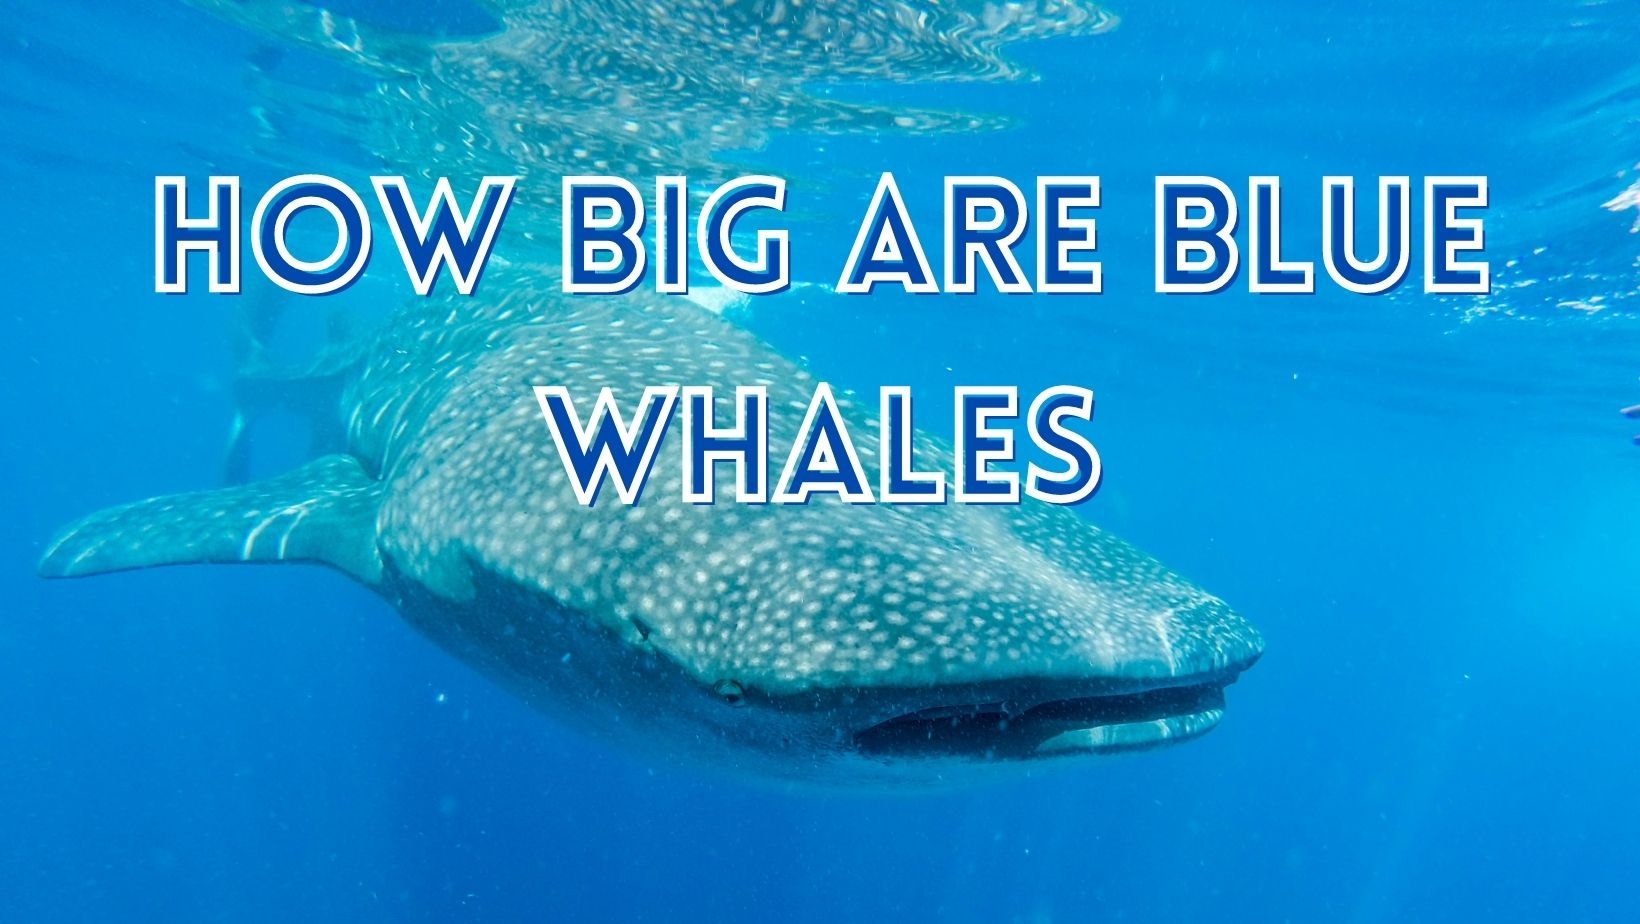 How big are blue whales